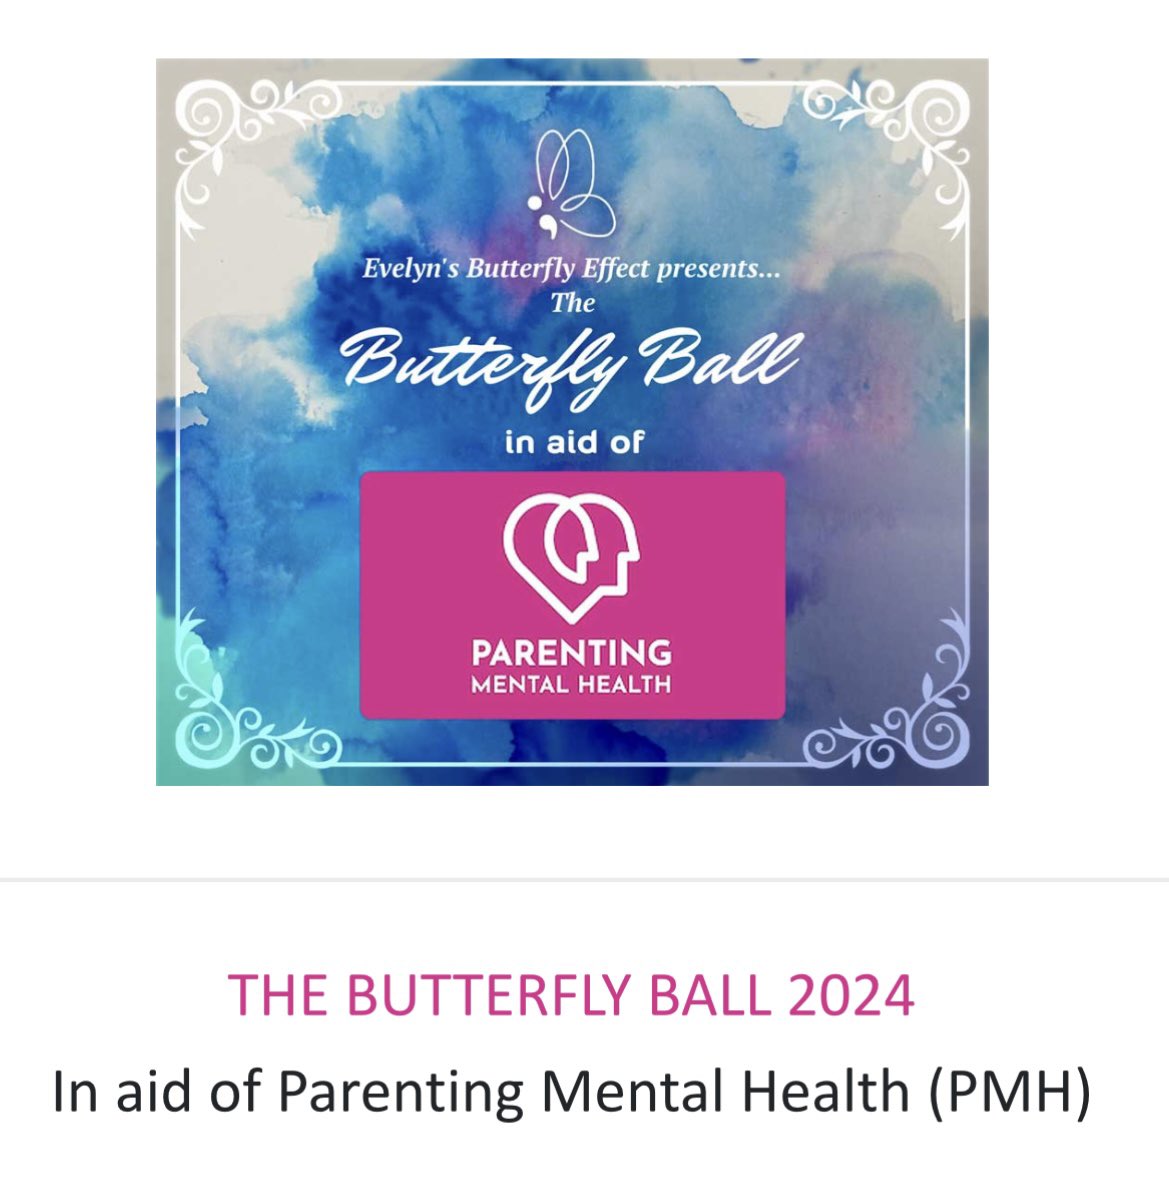 Amazing items up for grabs in this silent auction for #ParentingMentalHealth at the Butterfly Ball @Belton_Woods #Grantham You don’t have to be there to bid! Take a look  app.givefundraising.co.uk/the-butterfly-…